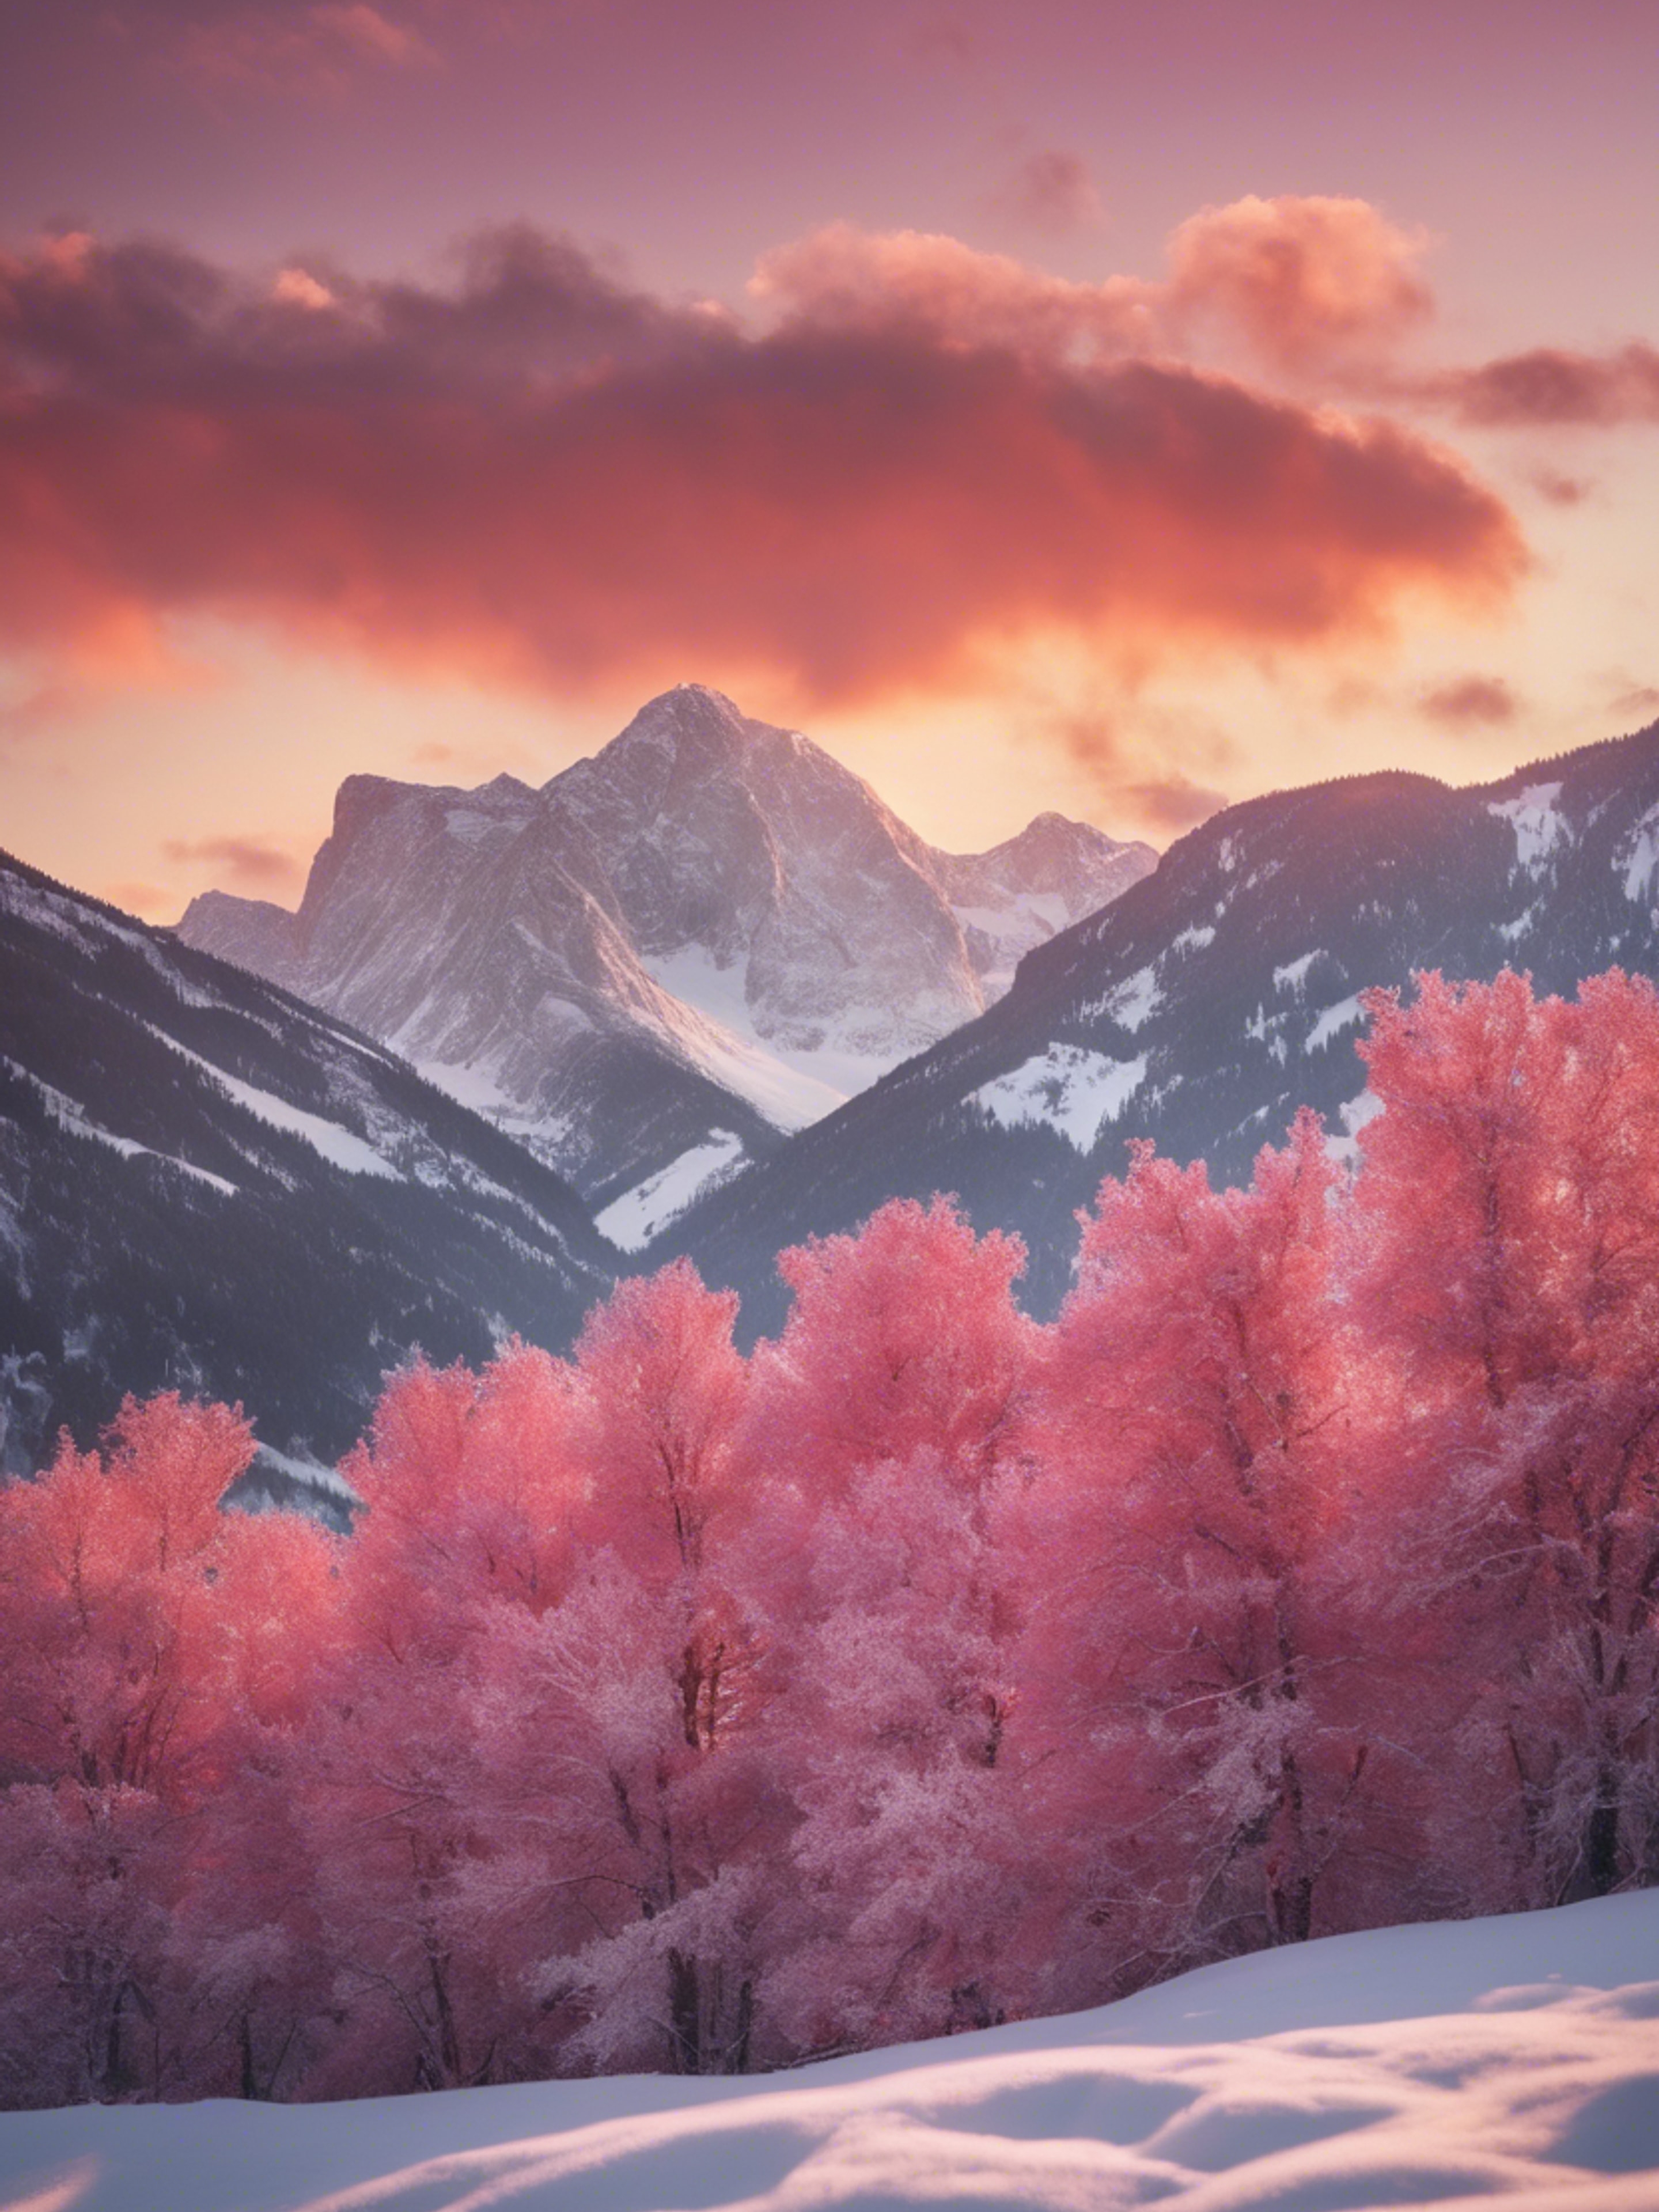 A vibrant sunrise over a snowy mountain range, casting a rosy hue over the untouched winter landscape. Wallpaper[020b06cc20ed49eab19c]